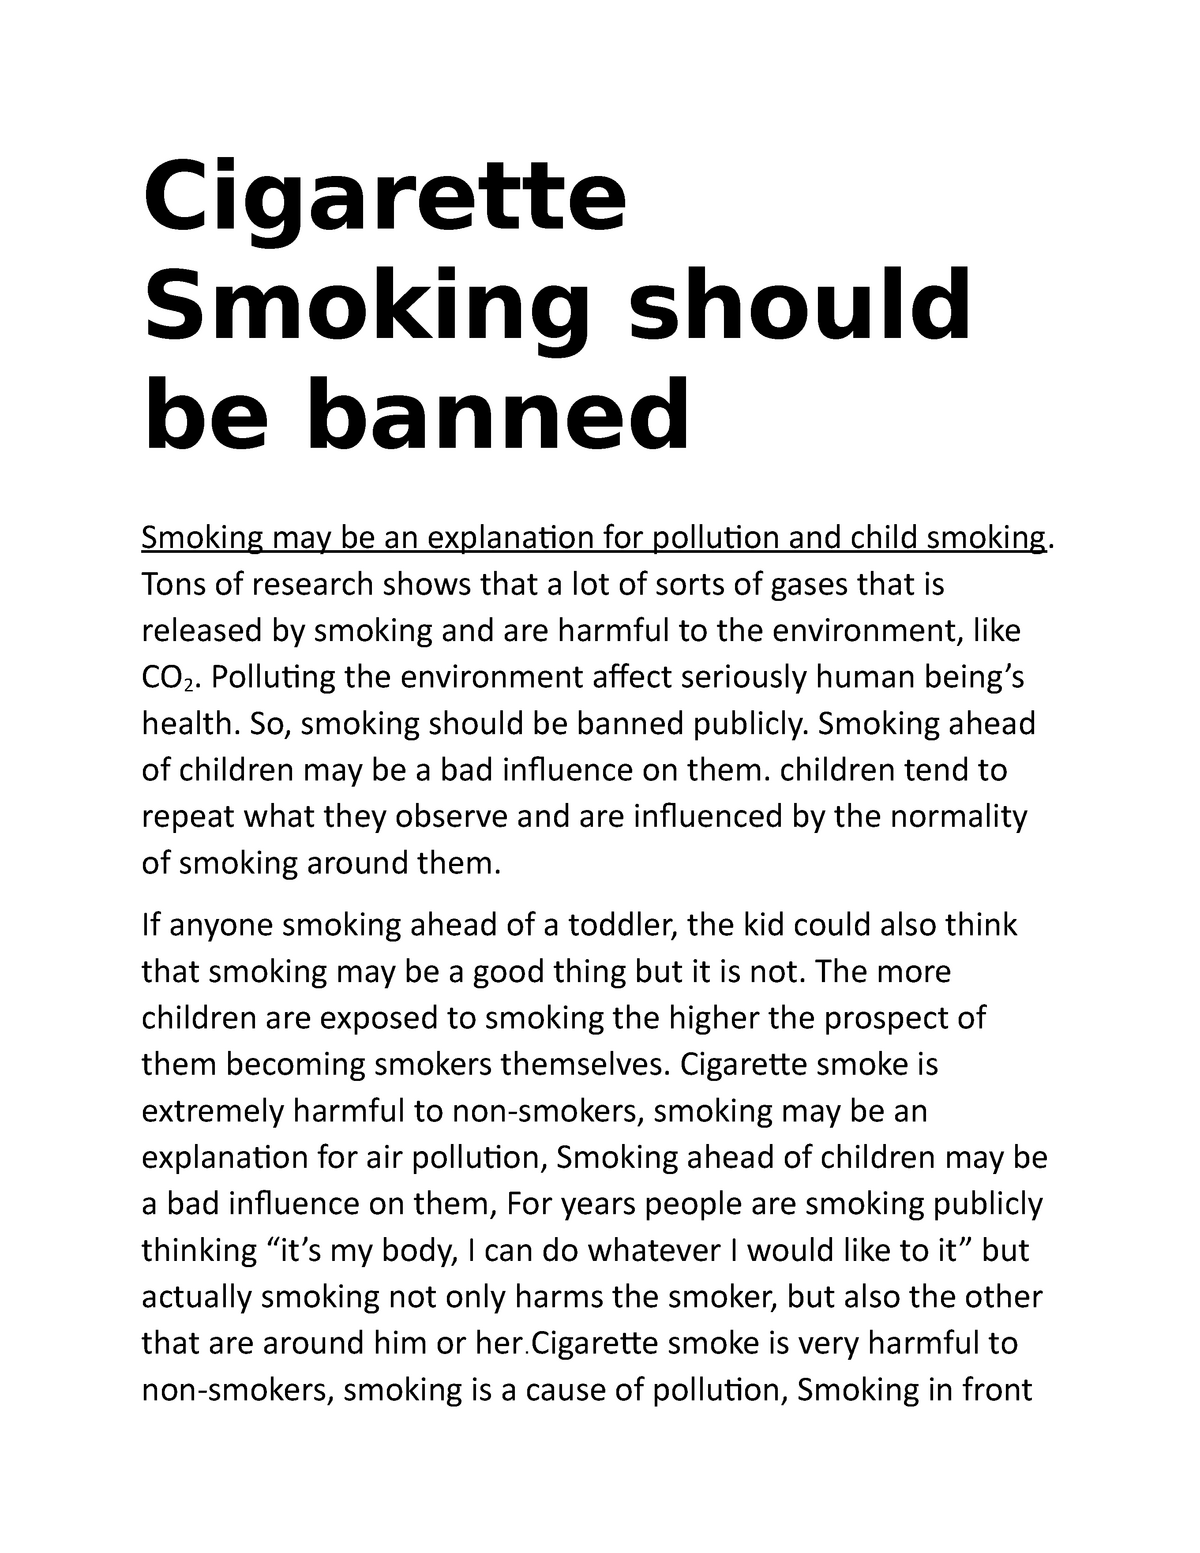 smoking should be banned in public places essay